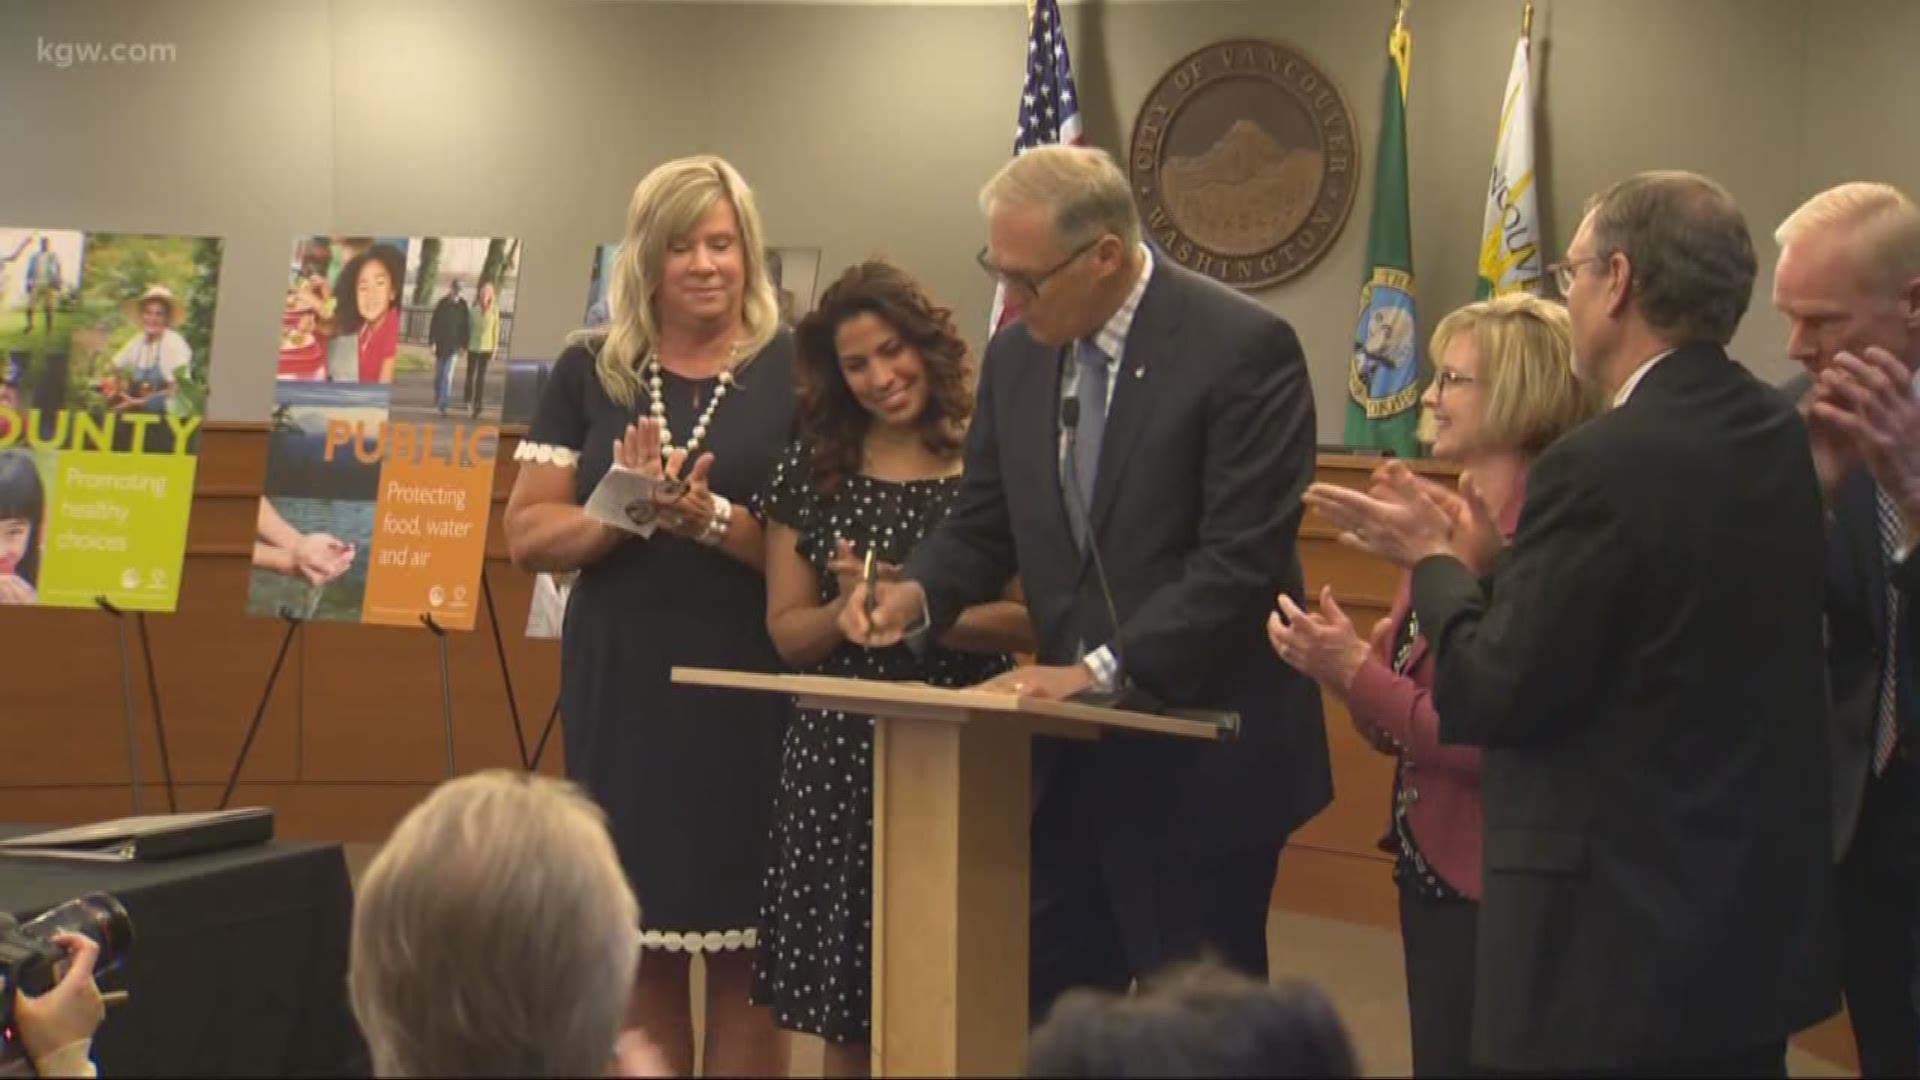 Clark County had over 70 measles cases during a recent outbreak. Gov. Jay Inslee symbolically signed a bill in Vancouver limiting vaccine exemptions, surrounded by county health officials and lawmakers who favored the bill.